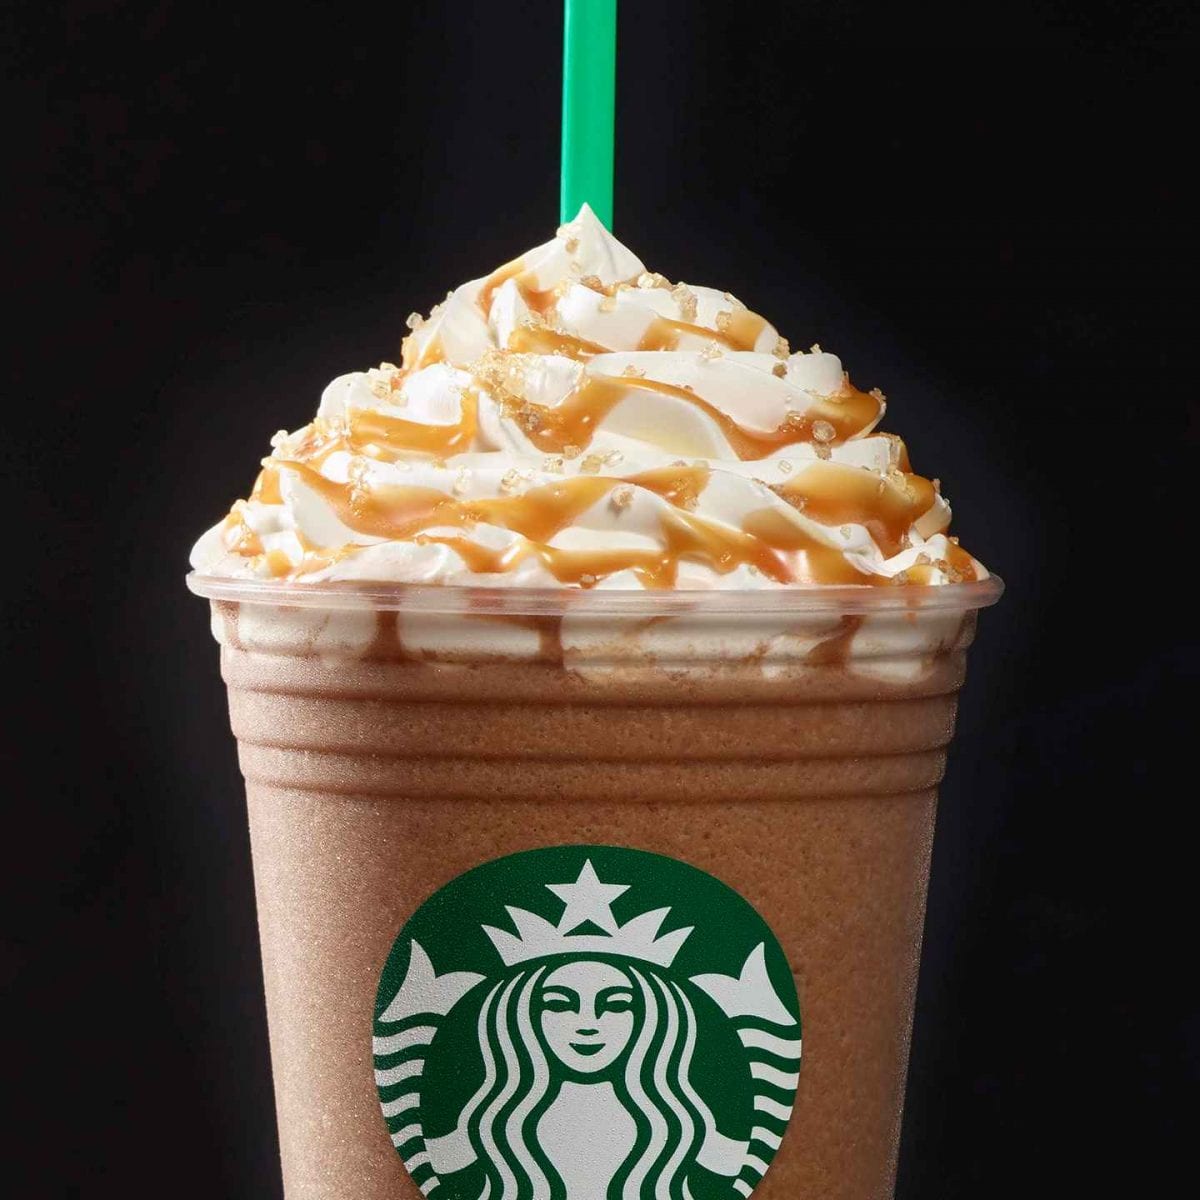 How To Make A Copycat Starbucks Salted Caramel Mocha Frappuccino At Home